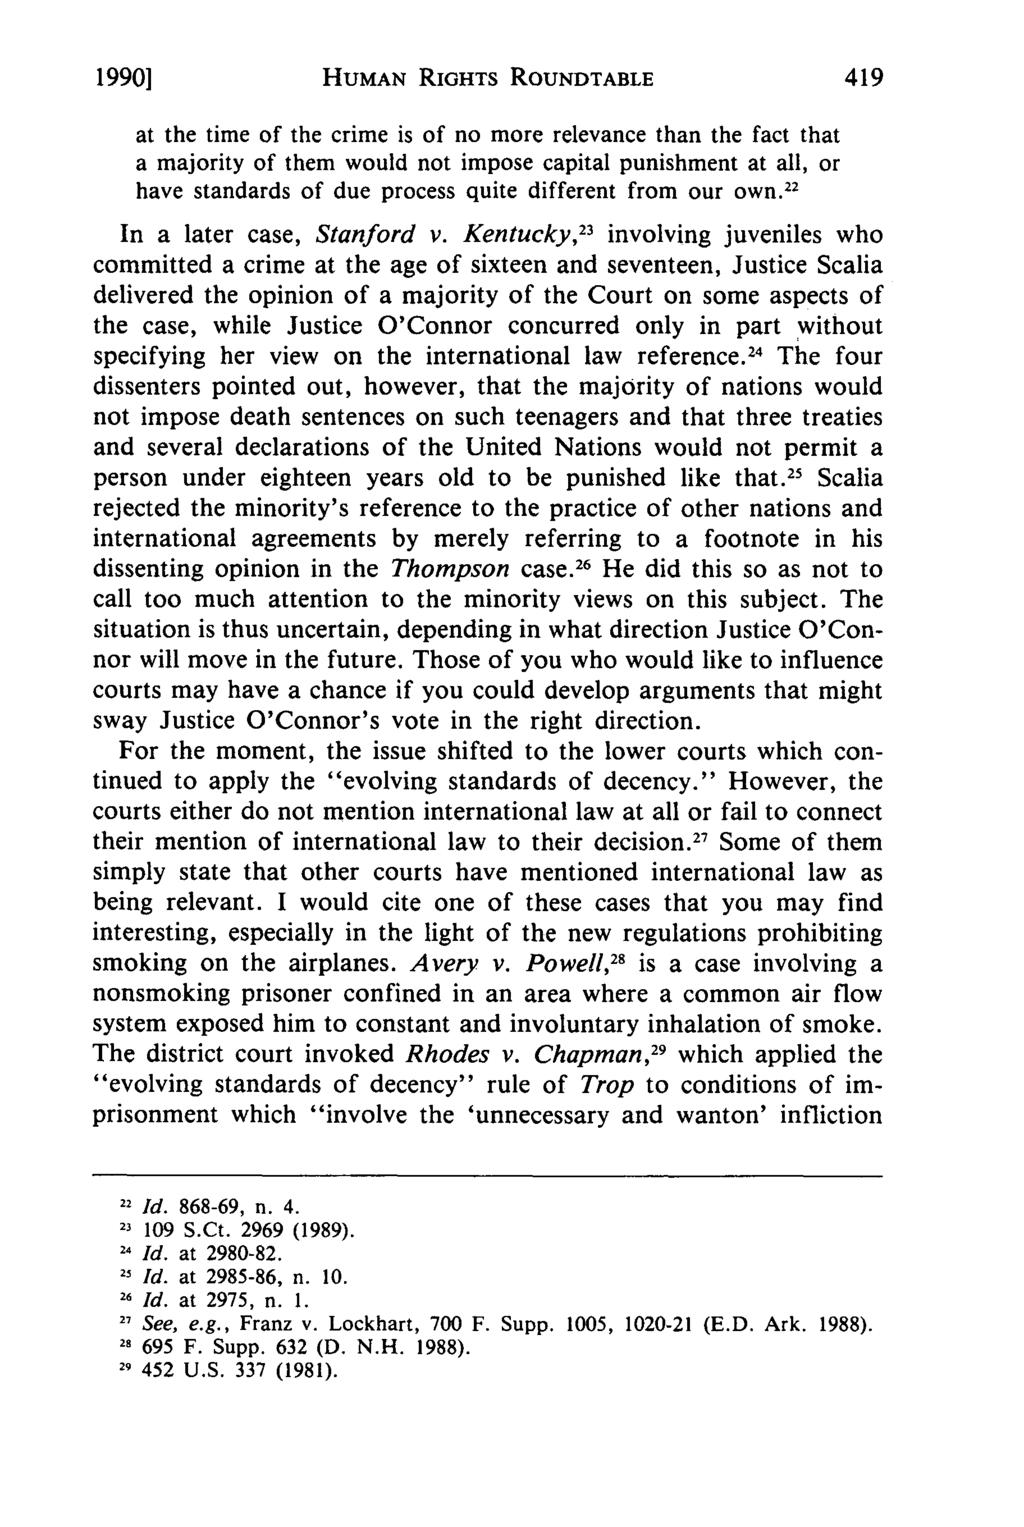 1990] HUMAN RIGHTS ROUNDTABLE at the time of the crime is of no more relevance than the fact that a majority of them would not impose capital punishment at all, or have standards of due process quite